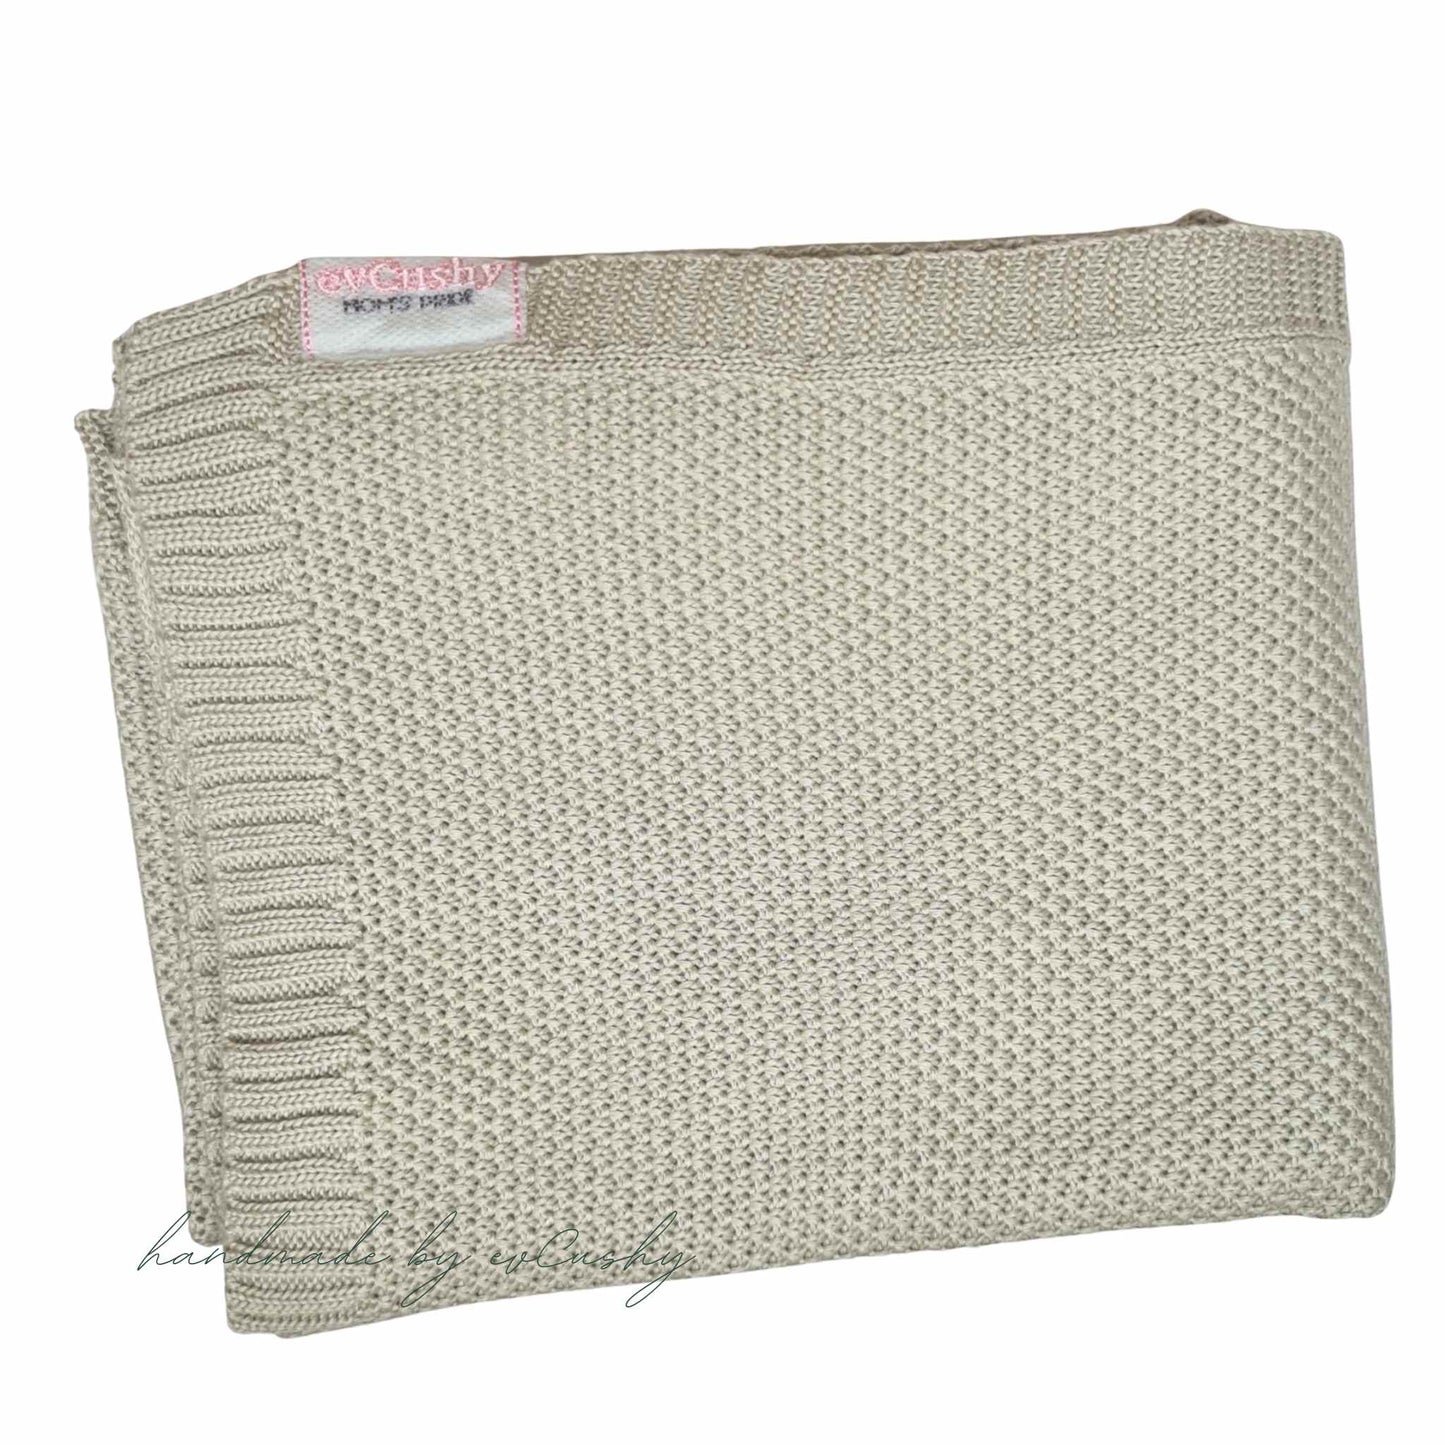 soft bamboo  knit blanket for baby  beige evcushy